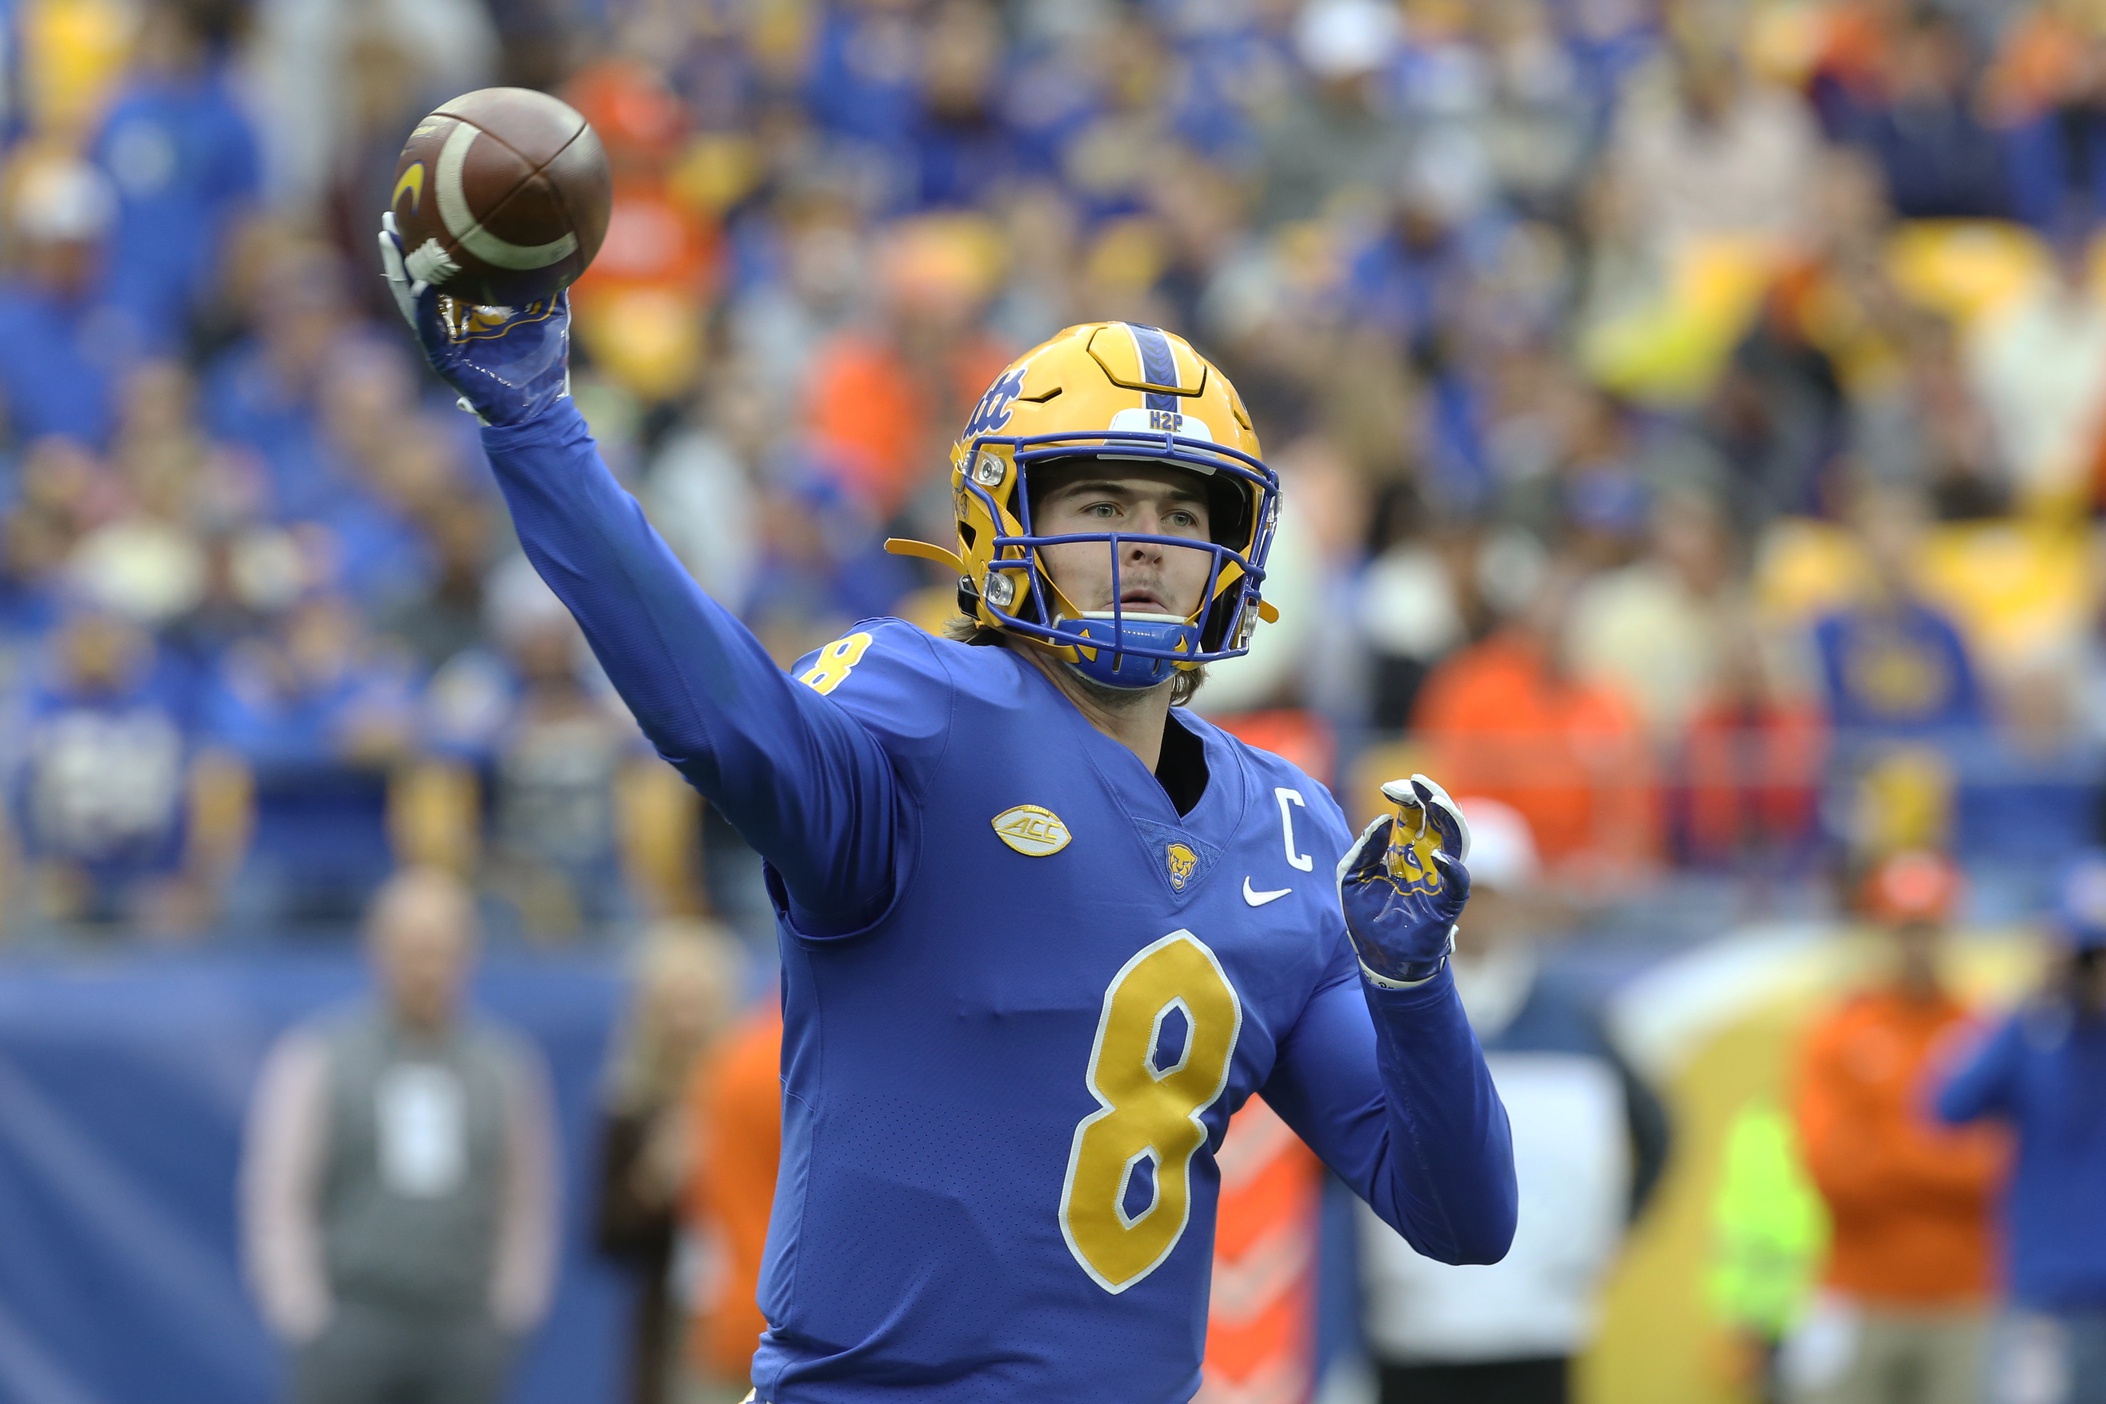 college football picks Kenny Pickett pittsburgh panthers predictions best bet odds